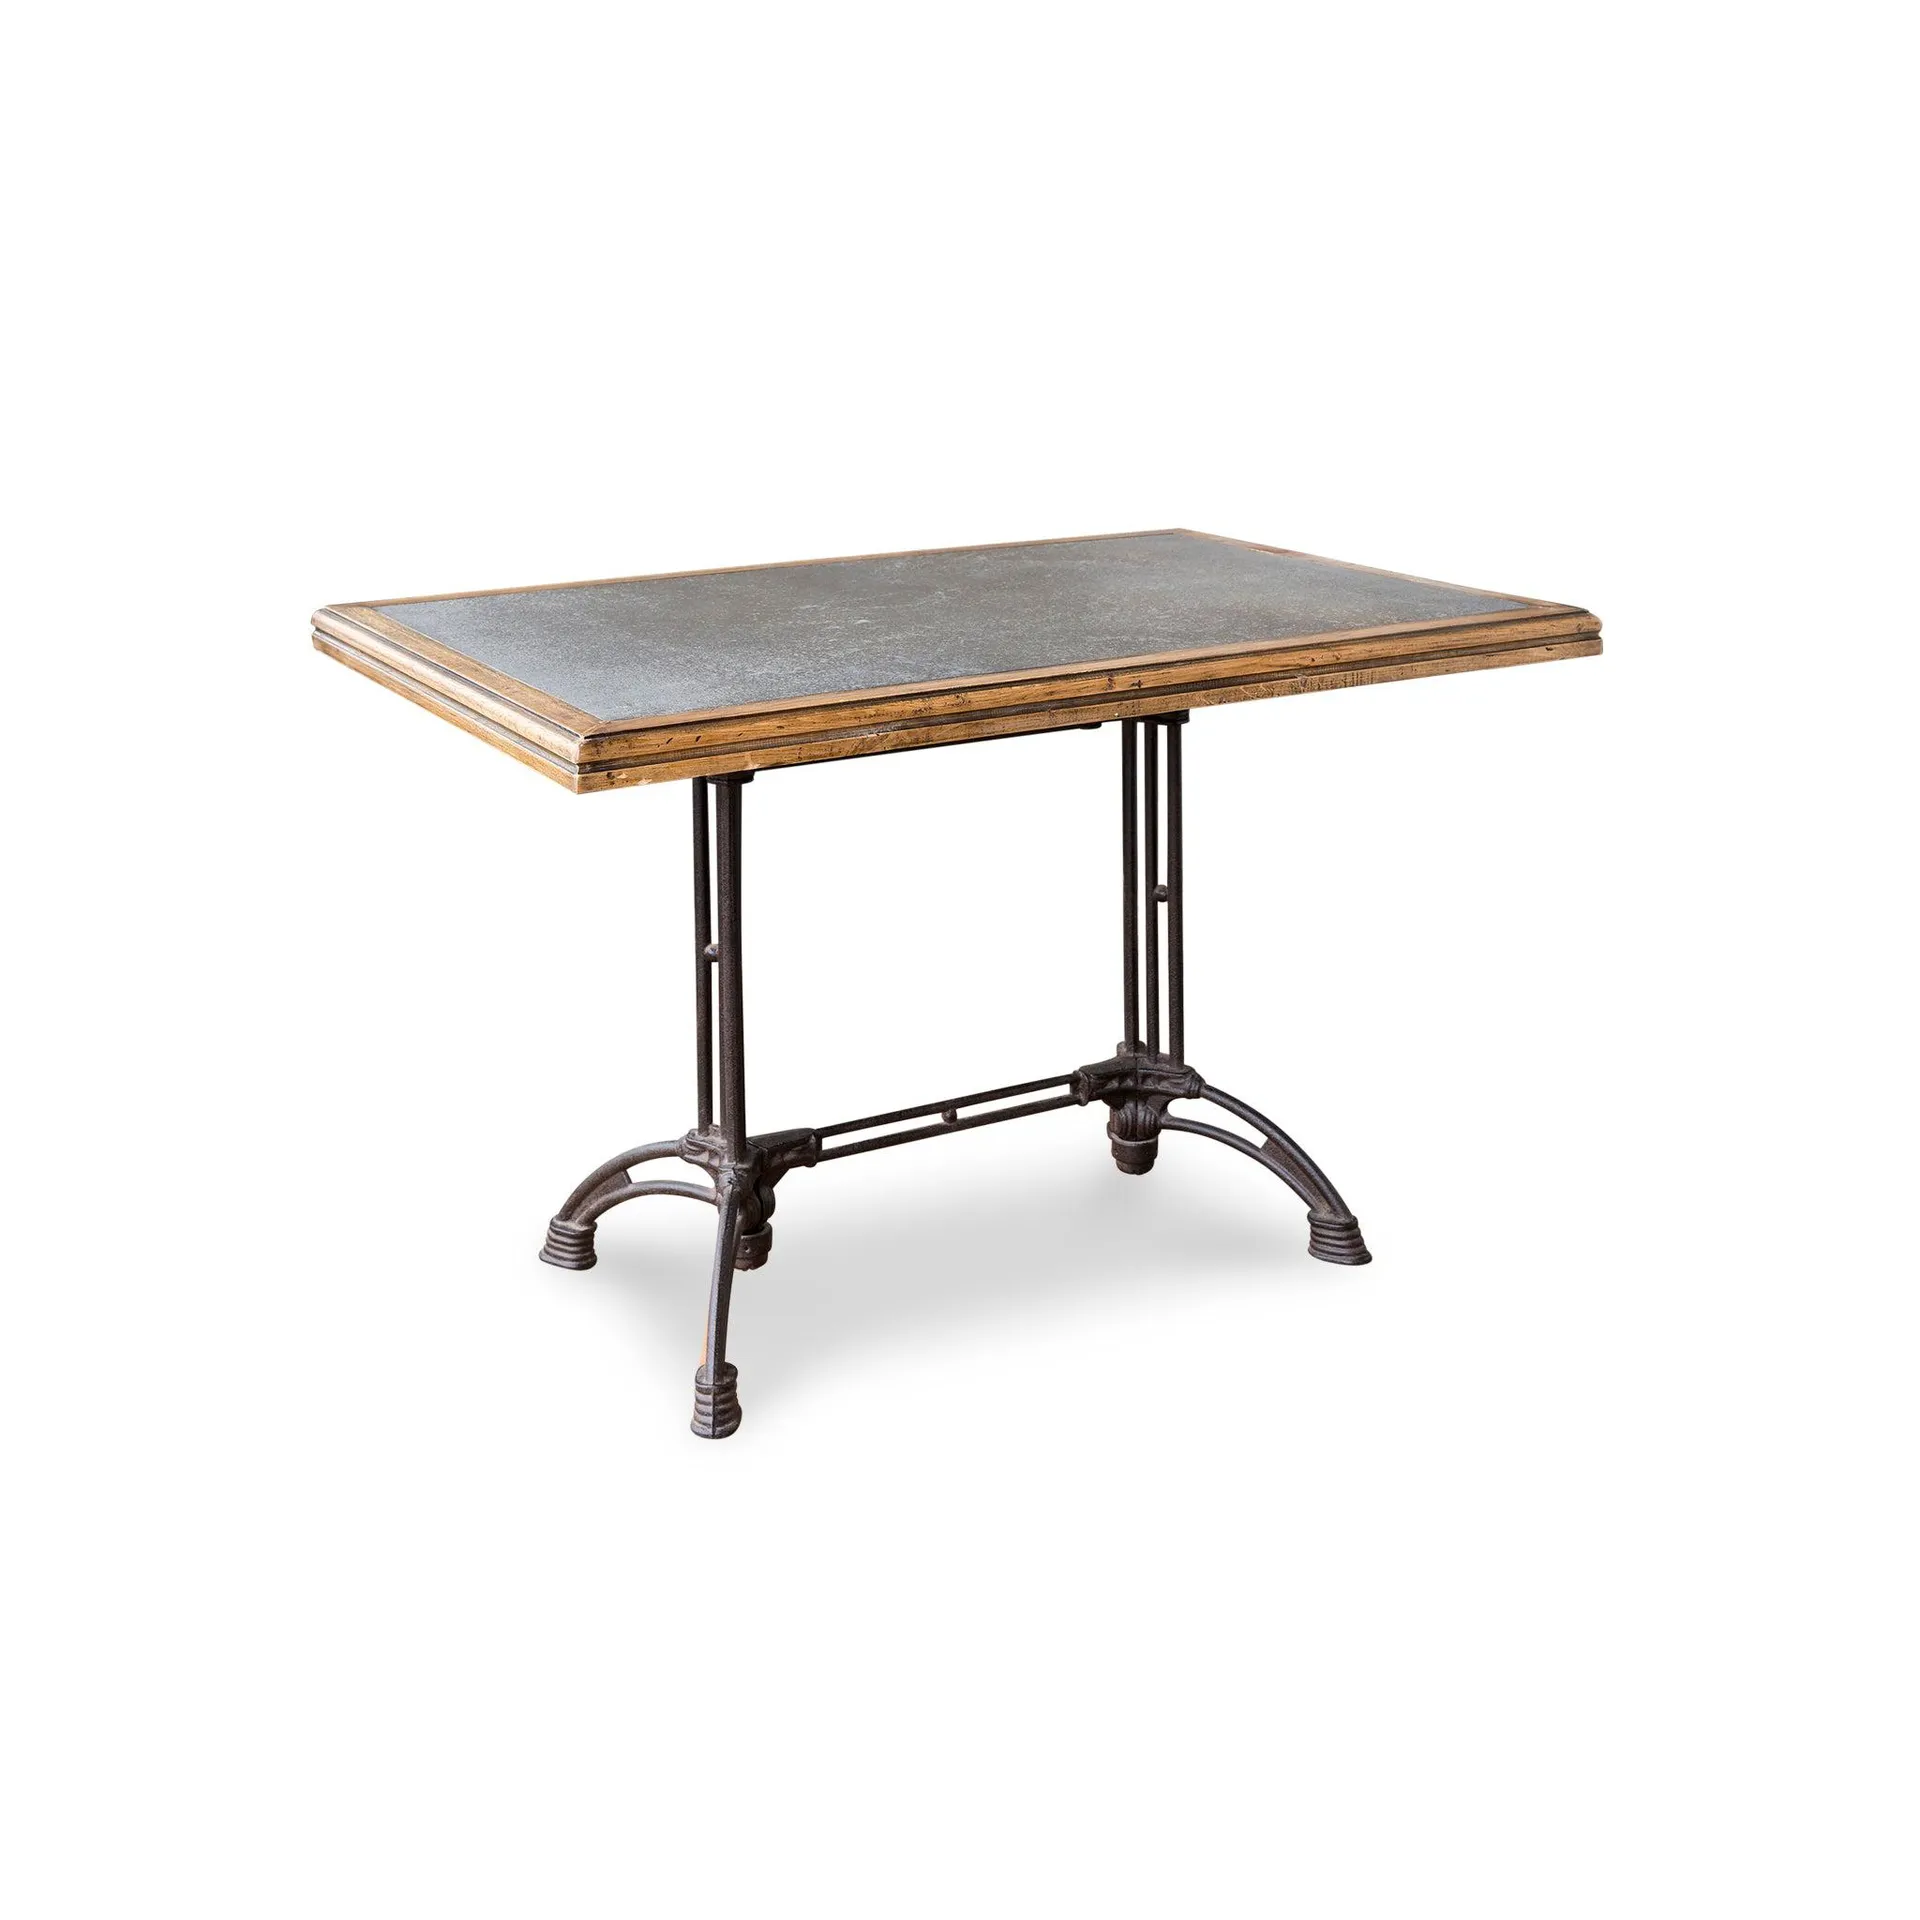 Tiberius Cafe Table